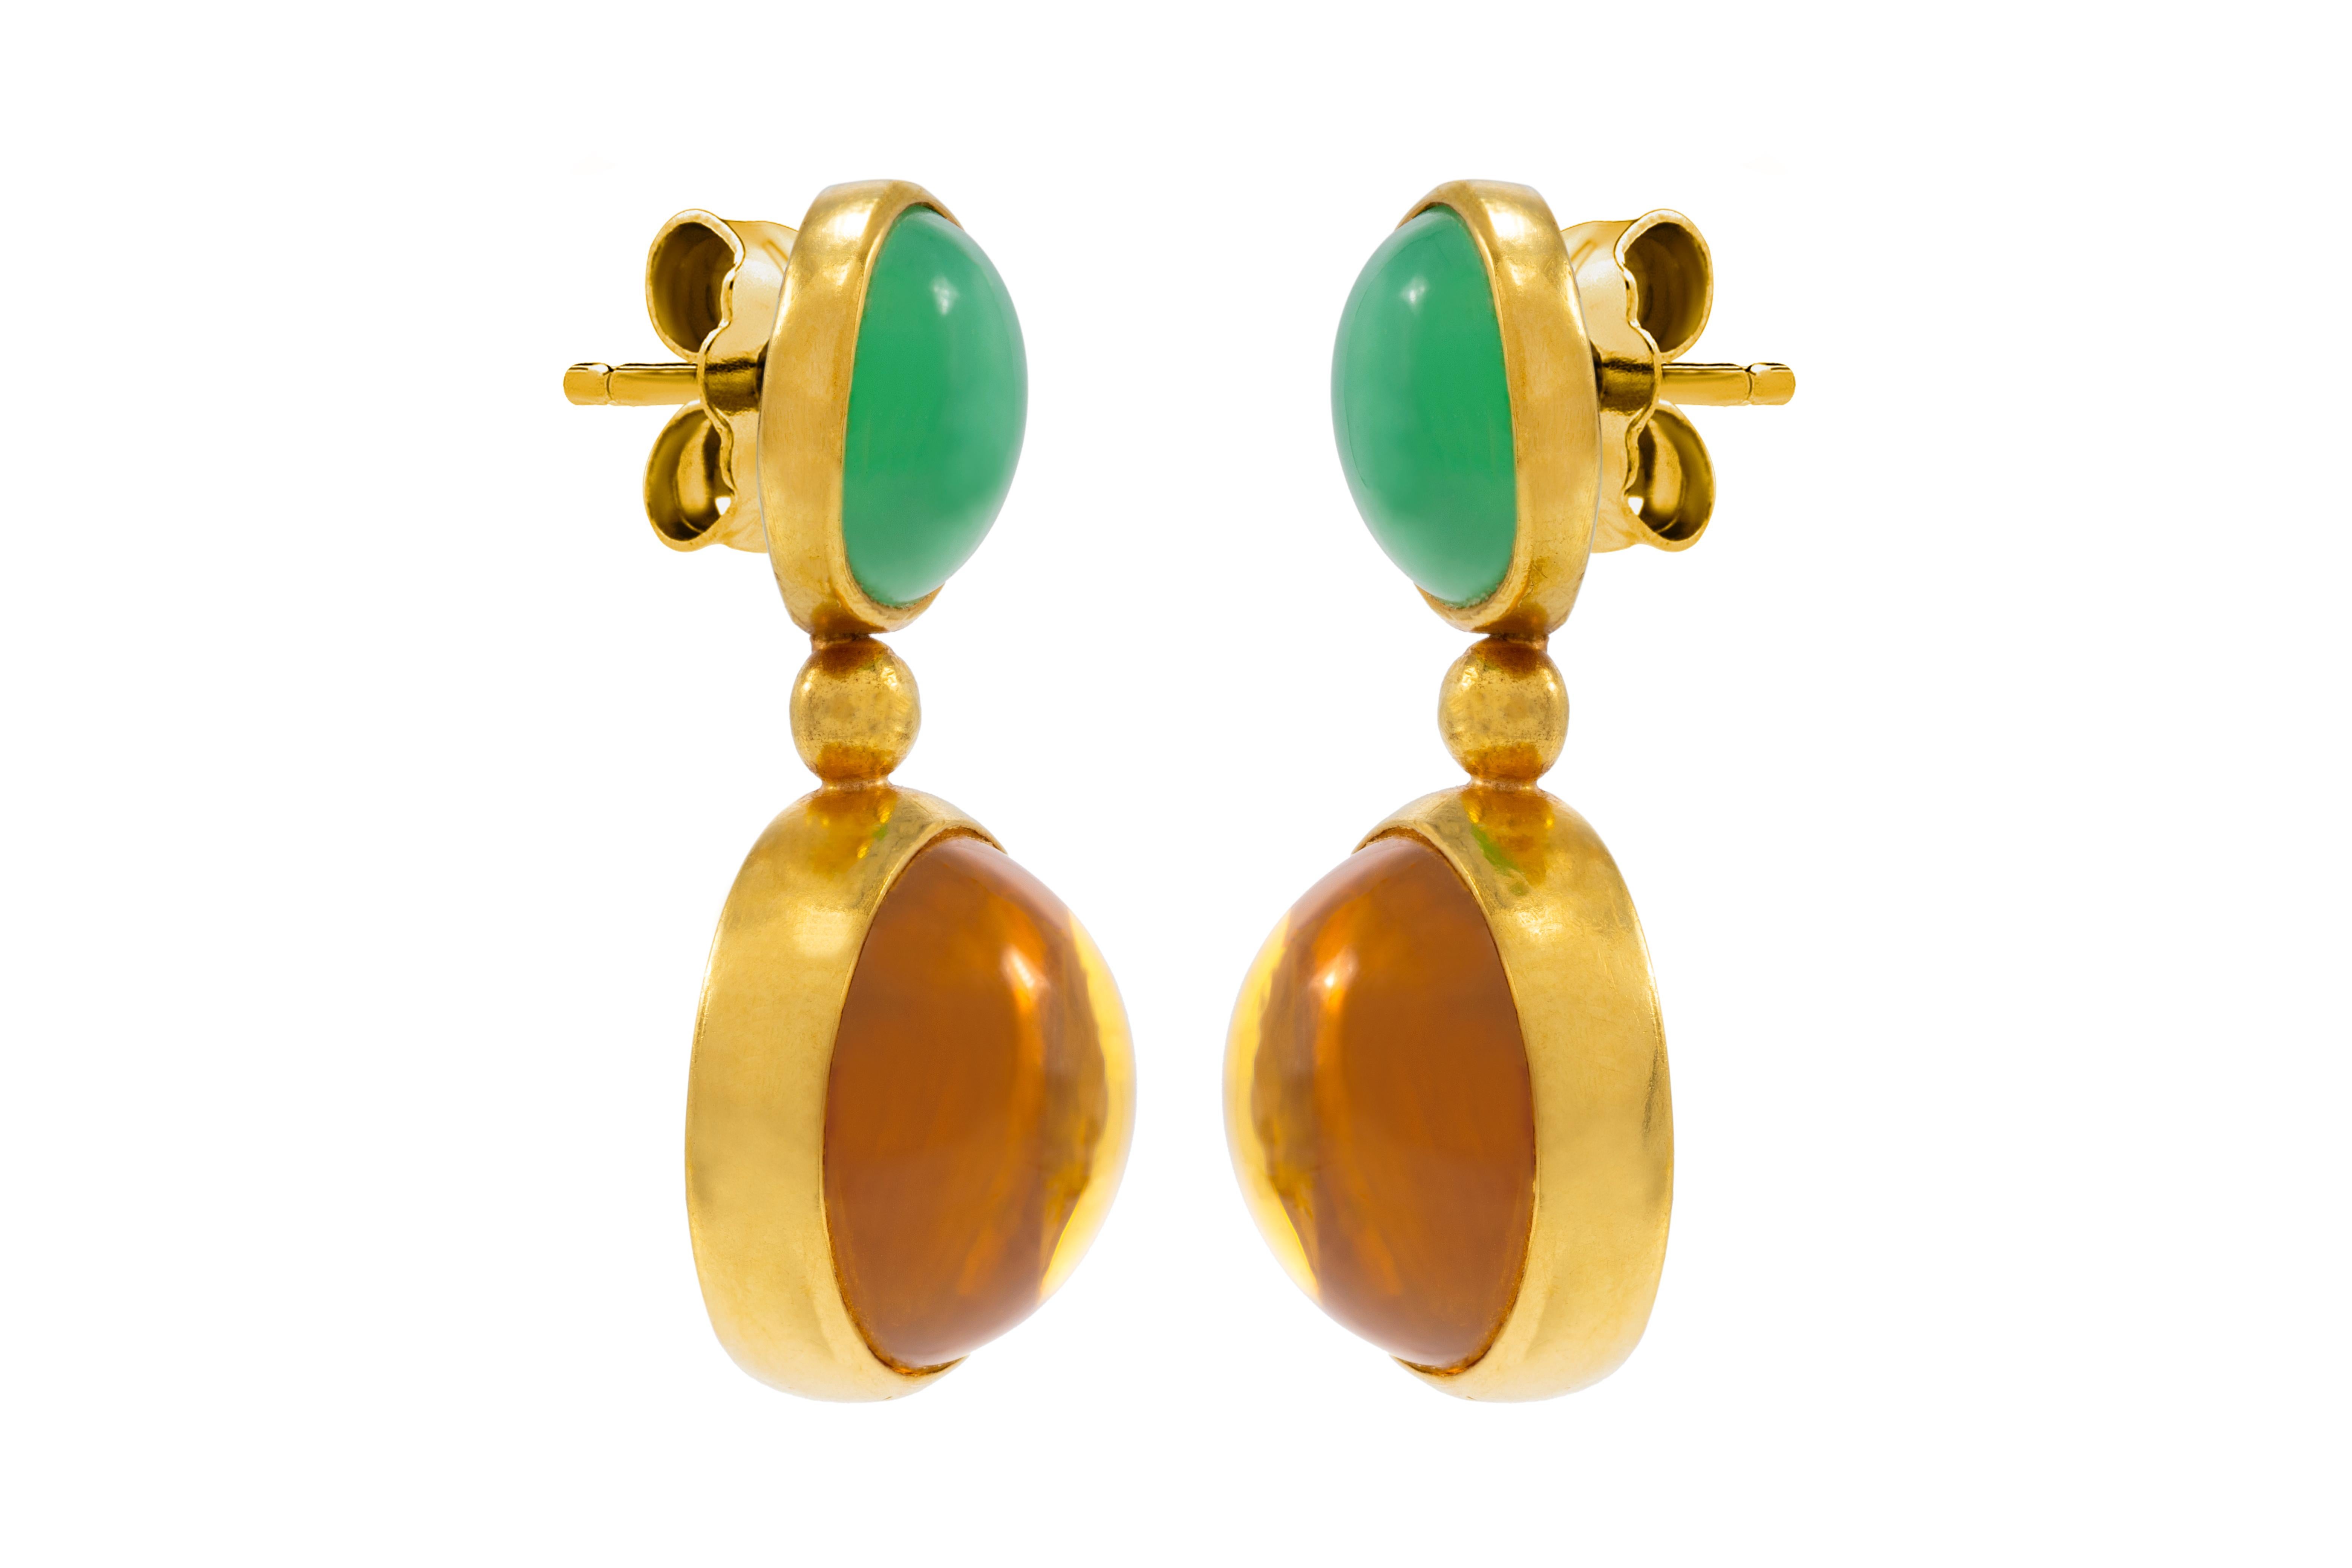 Artisan Gold Drop Earrings with Chrysoprase & Citrine Stones by Tagili